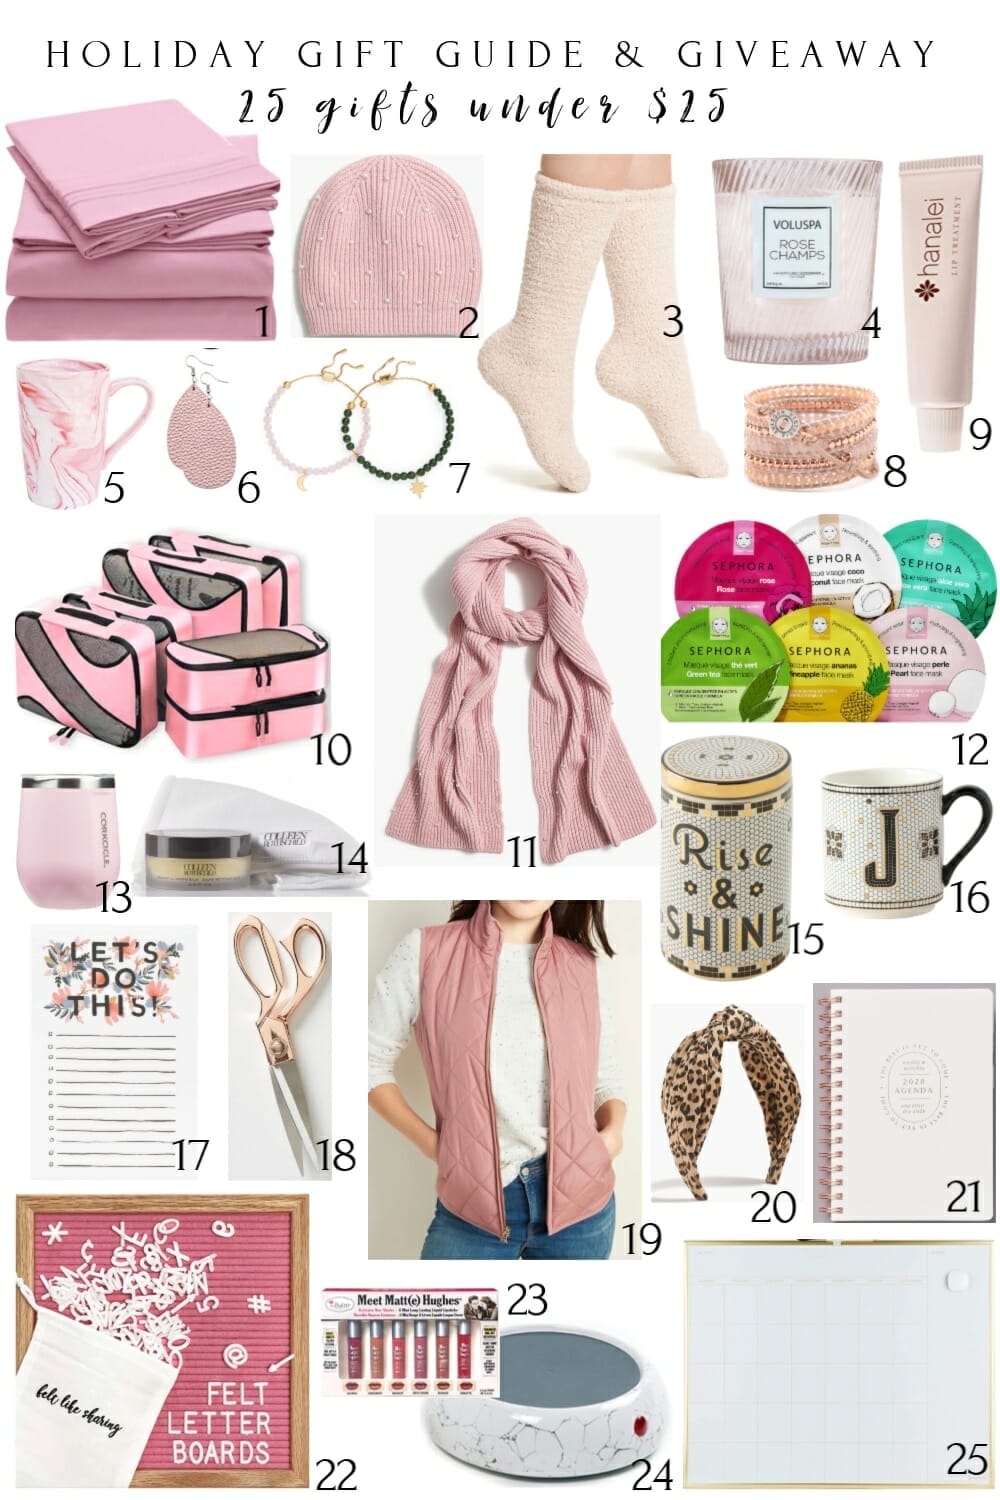 25 DAYS OF GIVEAWAY | 25 Christmas Gifts Under $25